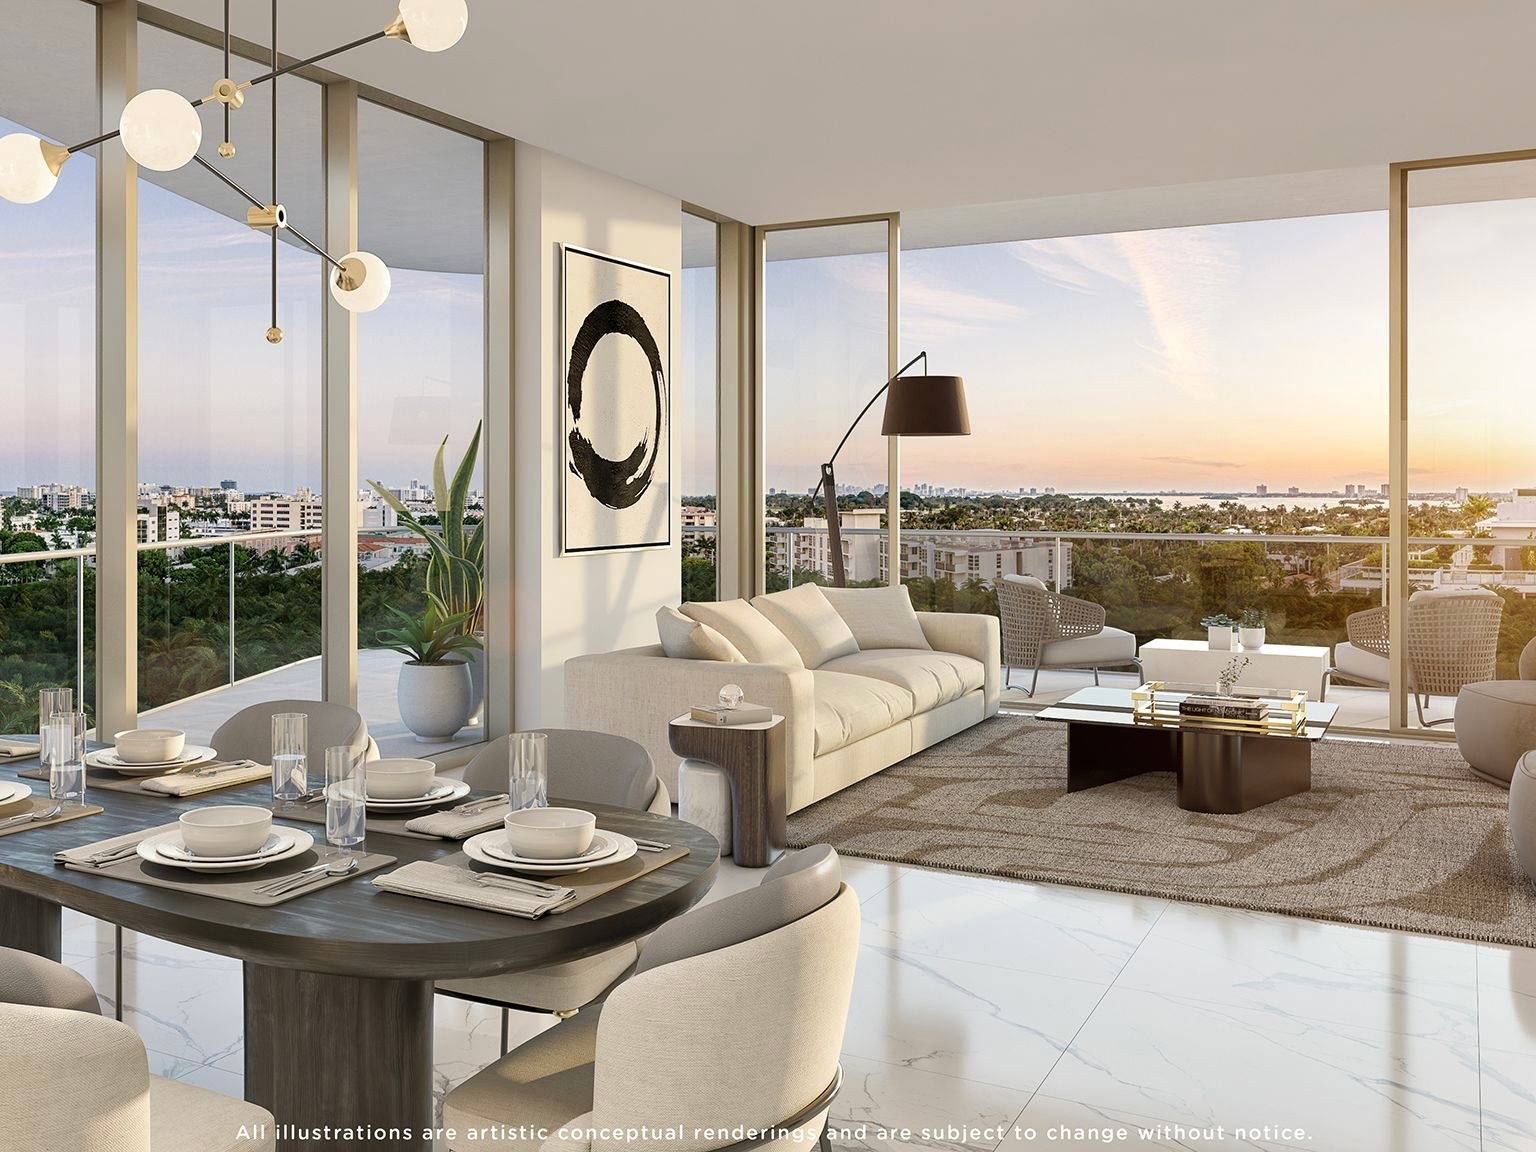 Miami Bal Harbour | Water View | City View | 3 BED 3.5 BATH | 1,657 SQFT | Outdoors Living 549 SQFT